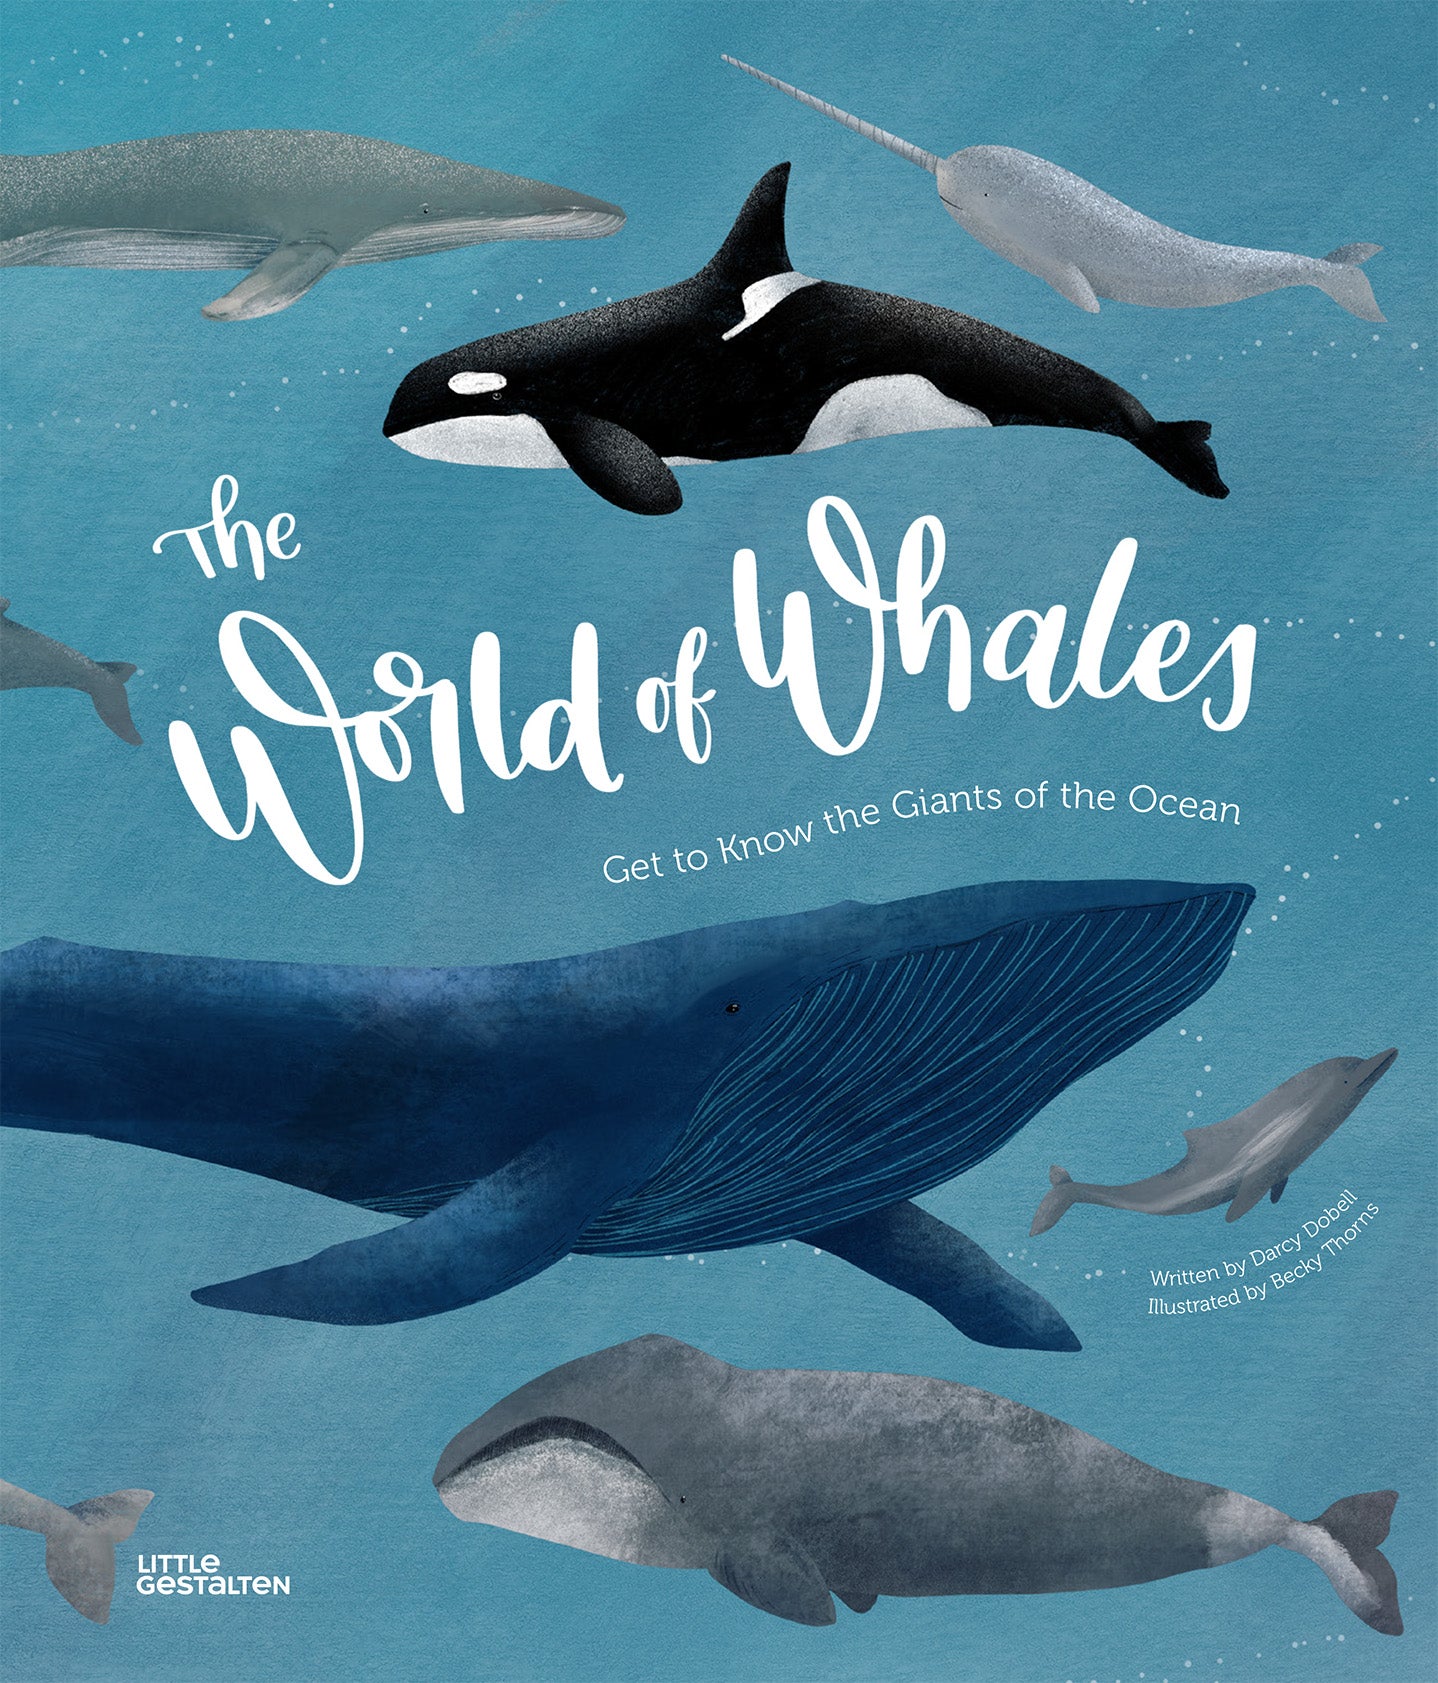 World of Whales: Get to Know the Giants of the Ocean